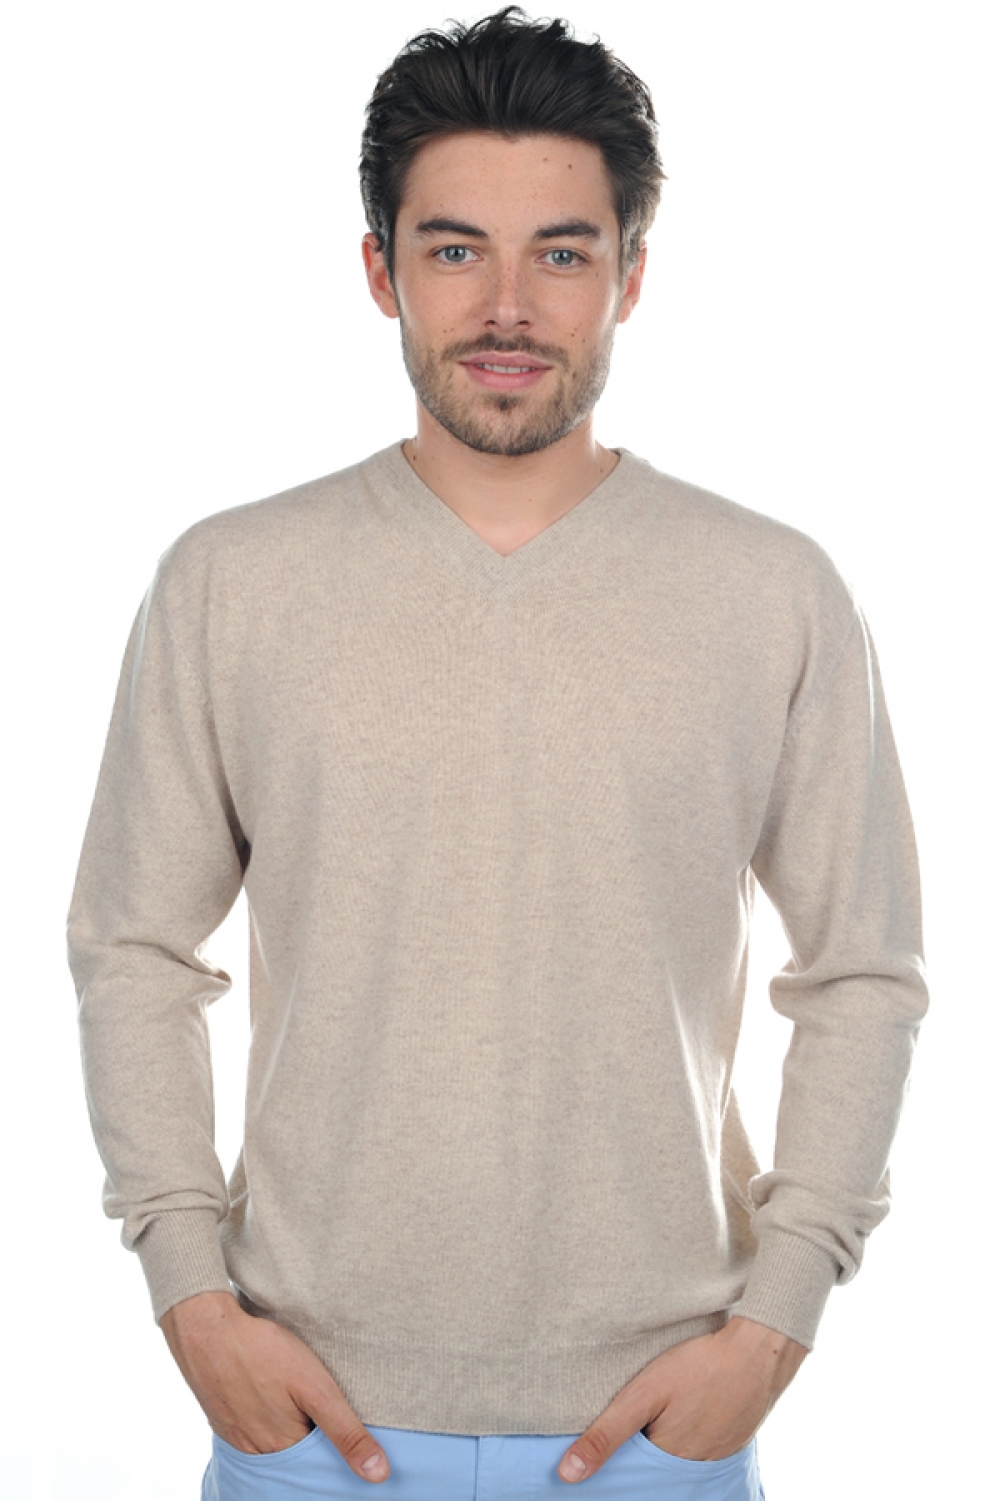 Cachemire pull homme gaspard natural beige 2xl